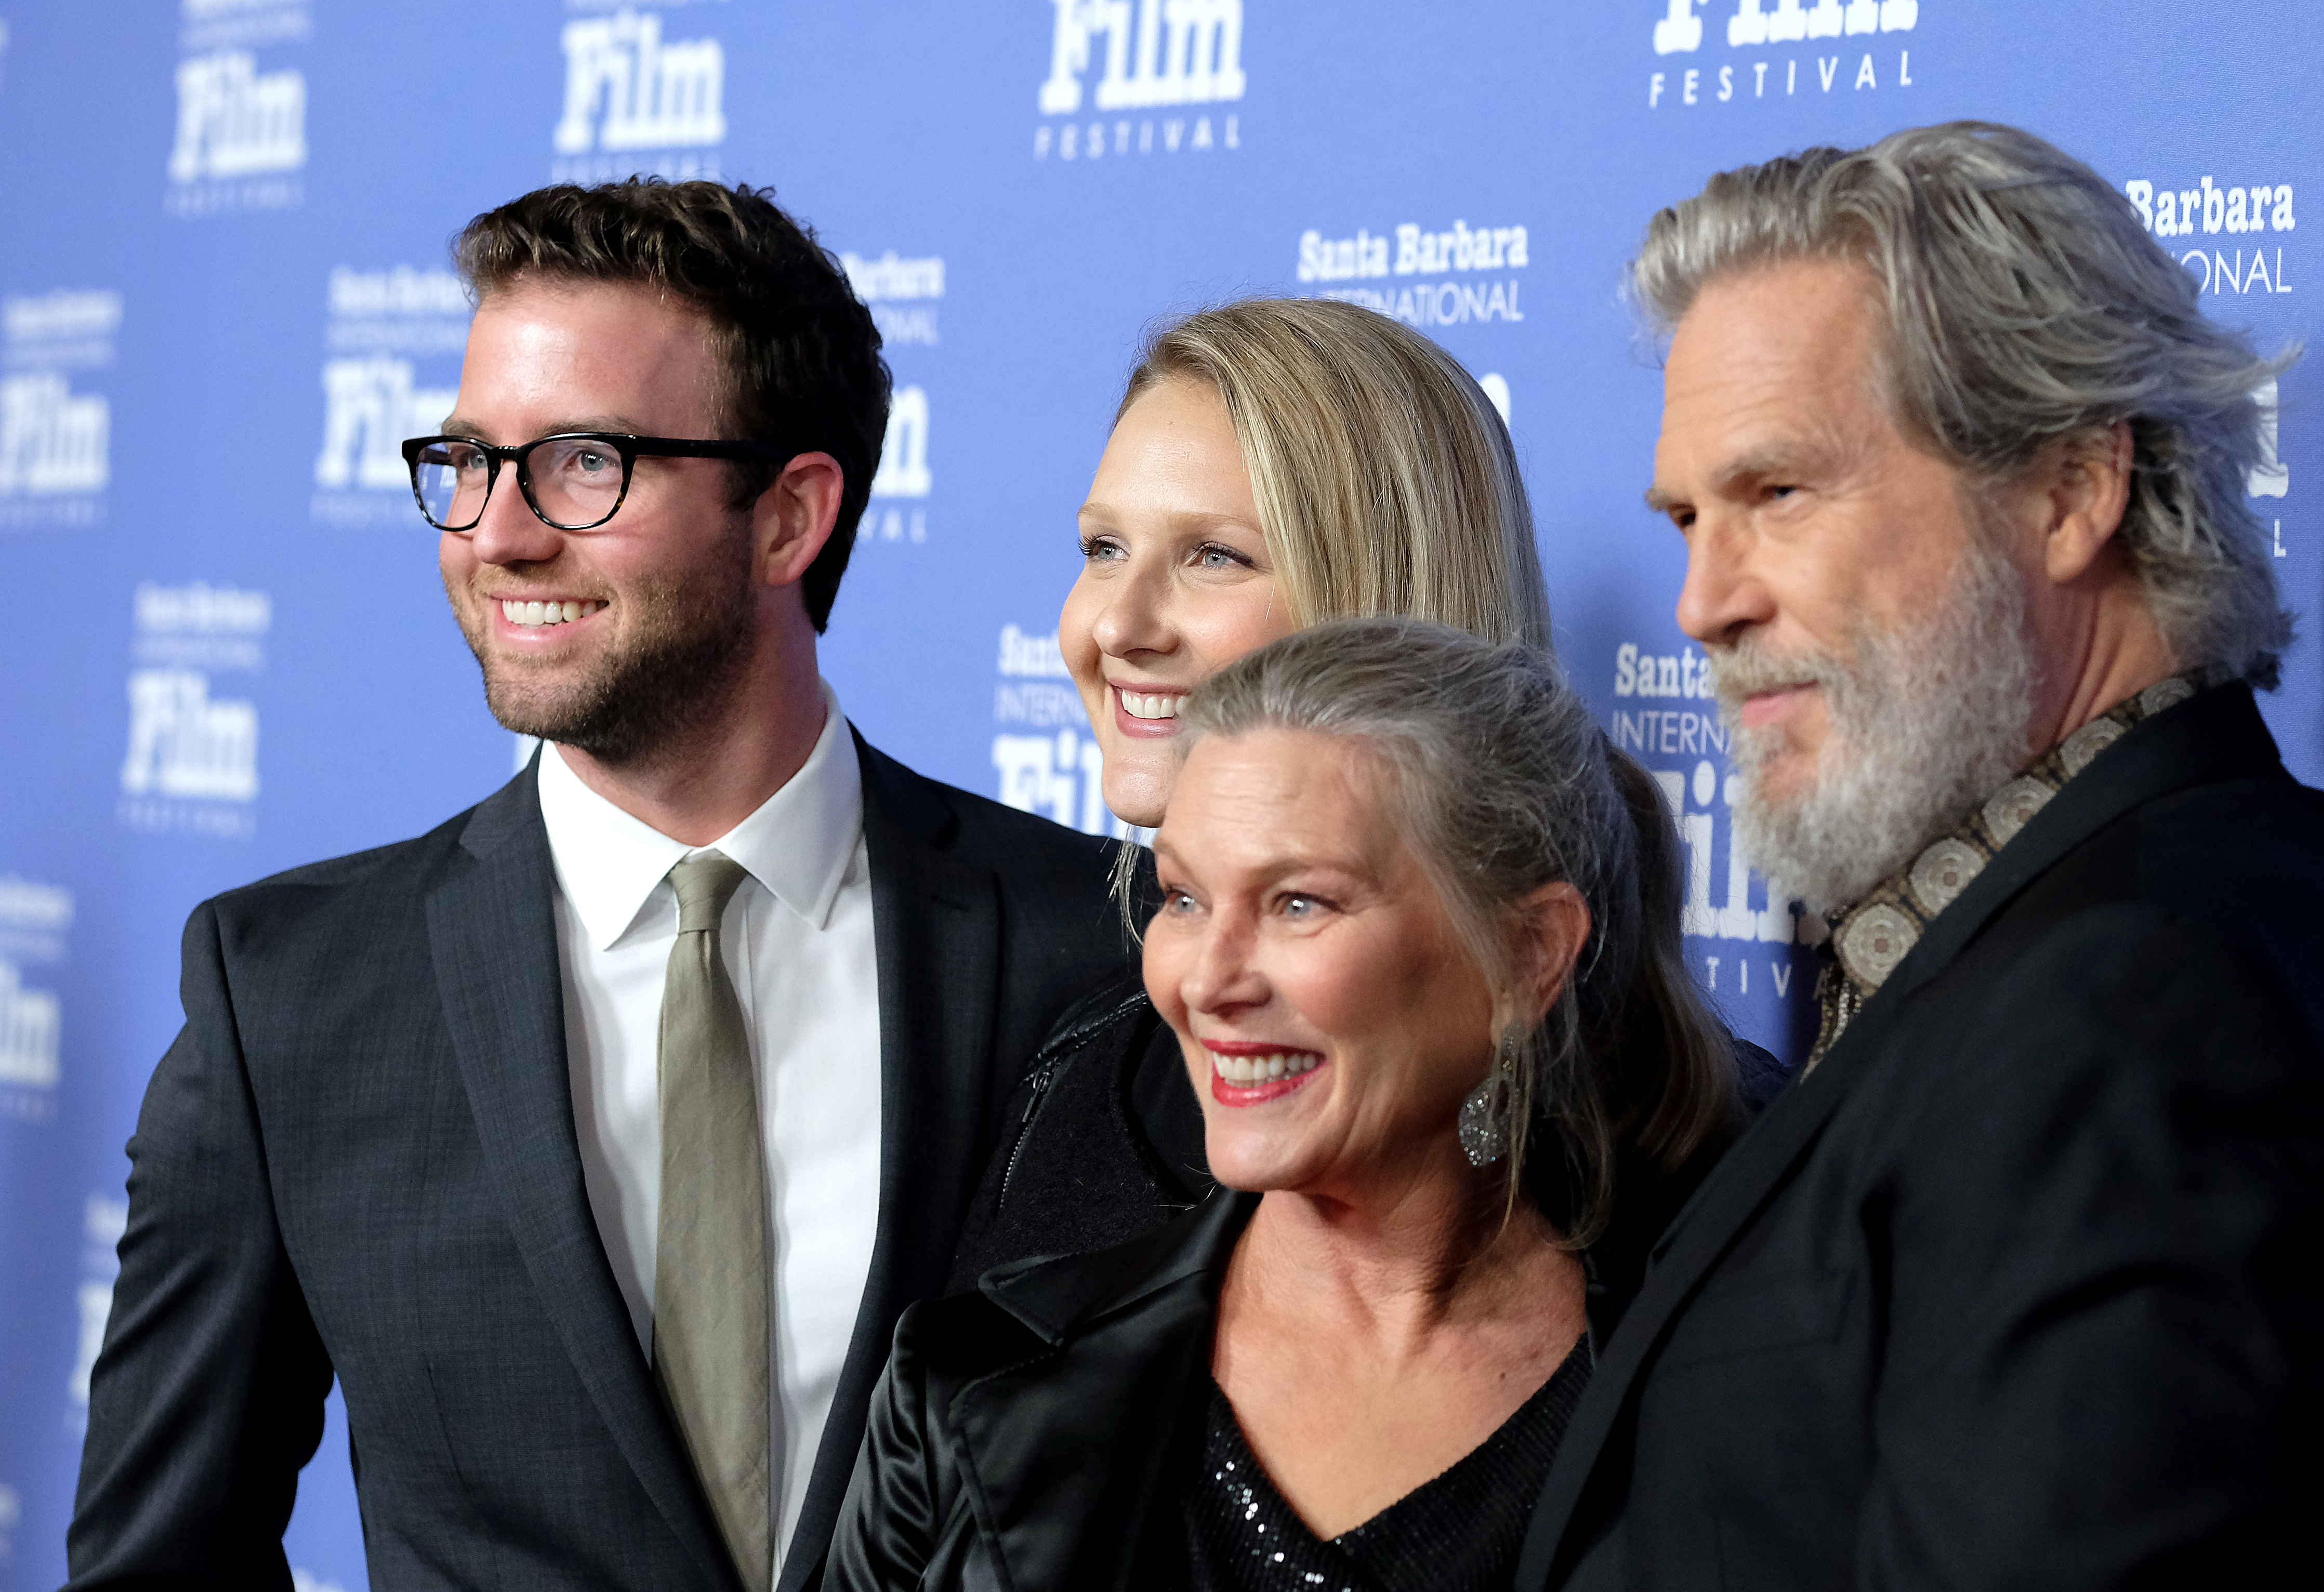 Jeff Bridges (R) and family attend the American Riviera Award honoring him at the Arlington Theatre on February 9, 2017, in Santa Barbara, California. | Source: Getty Images